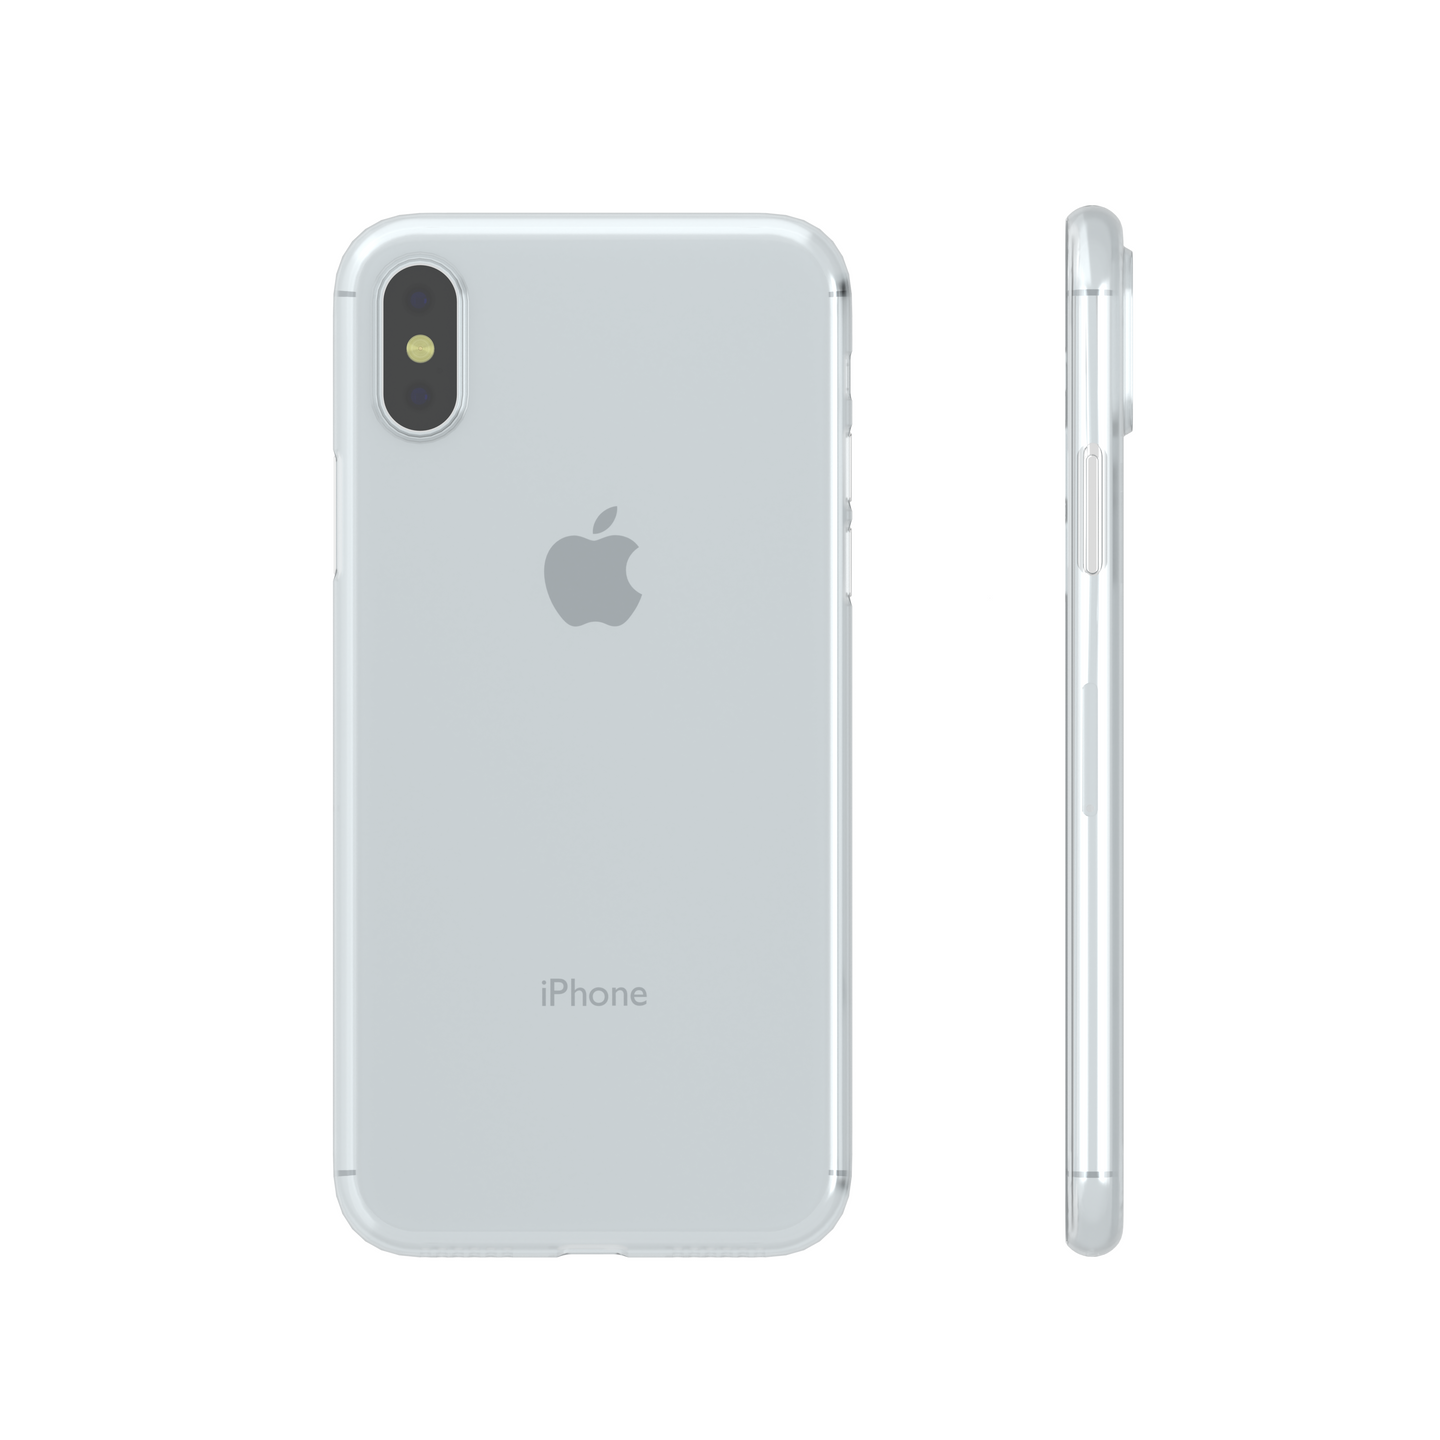 Slimcase for iPhone XS